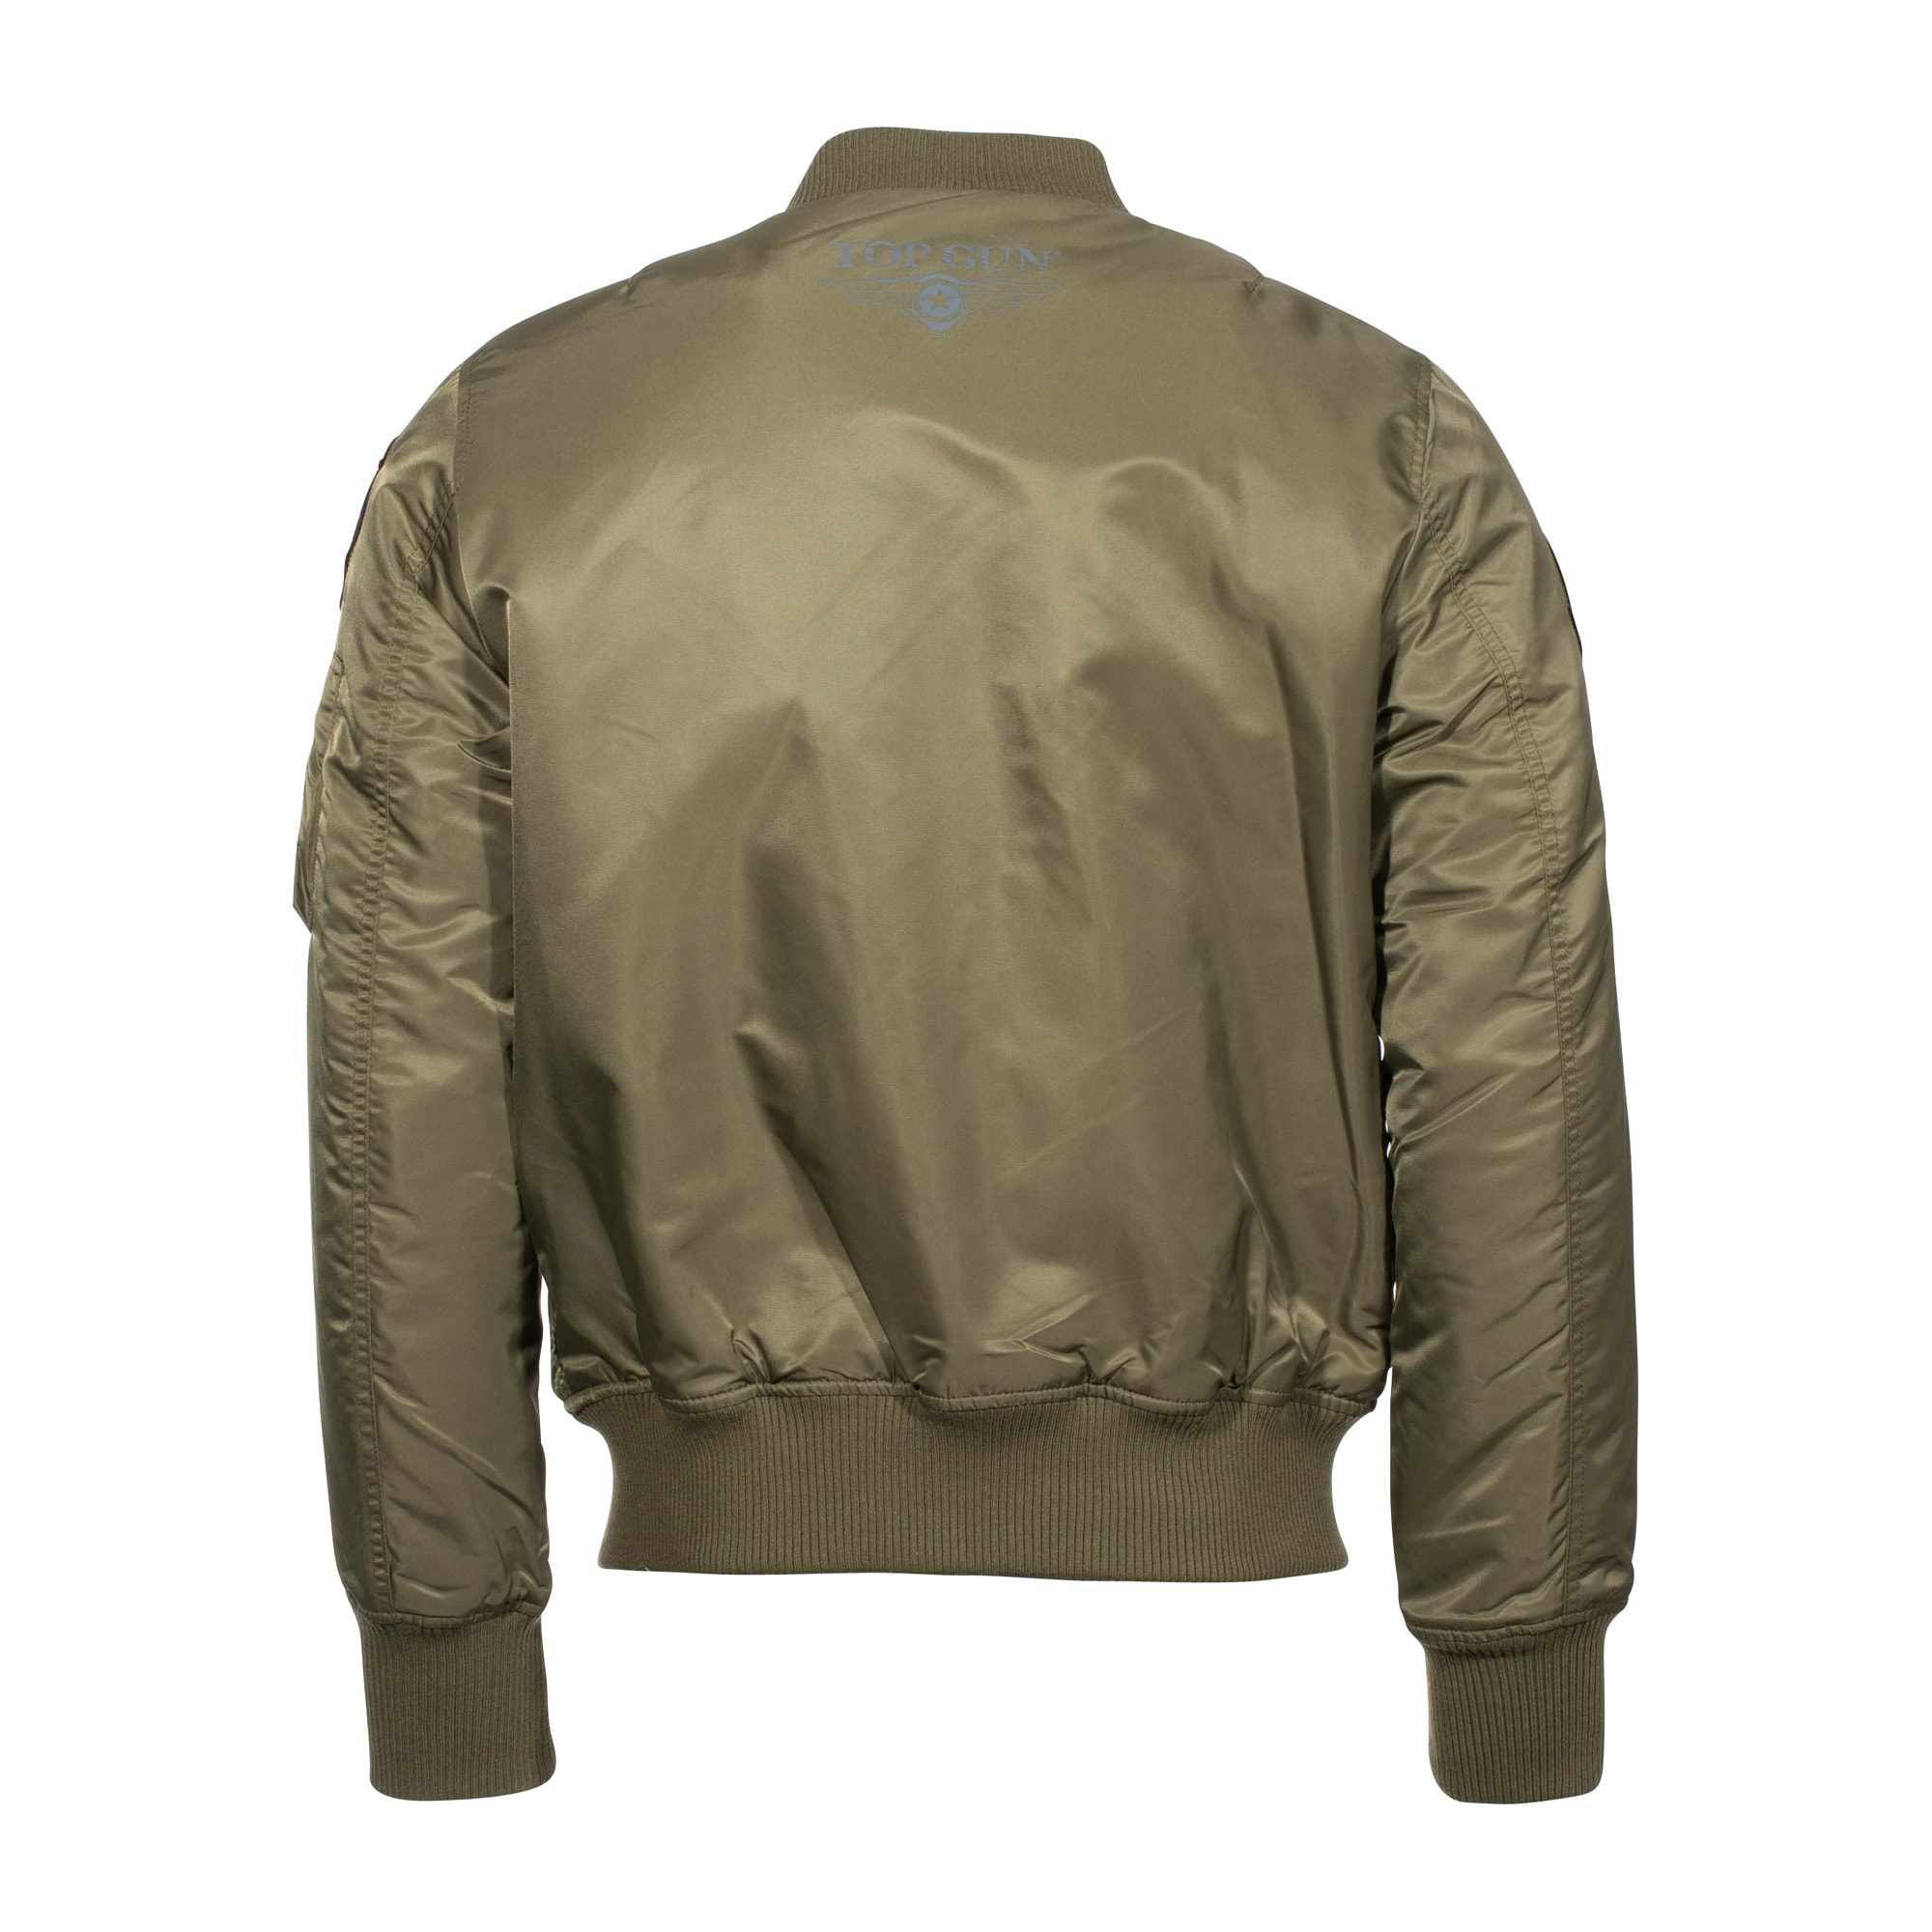 Purchase the Top Gun Flight Jacket Beast olive by ASMC